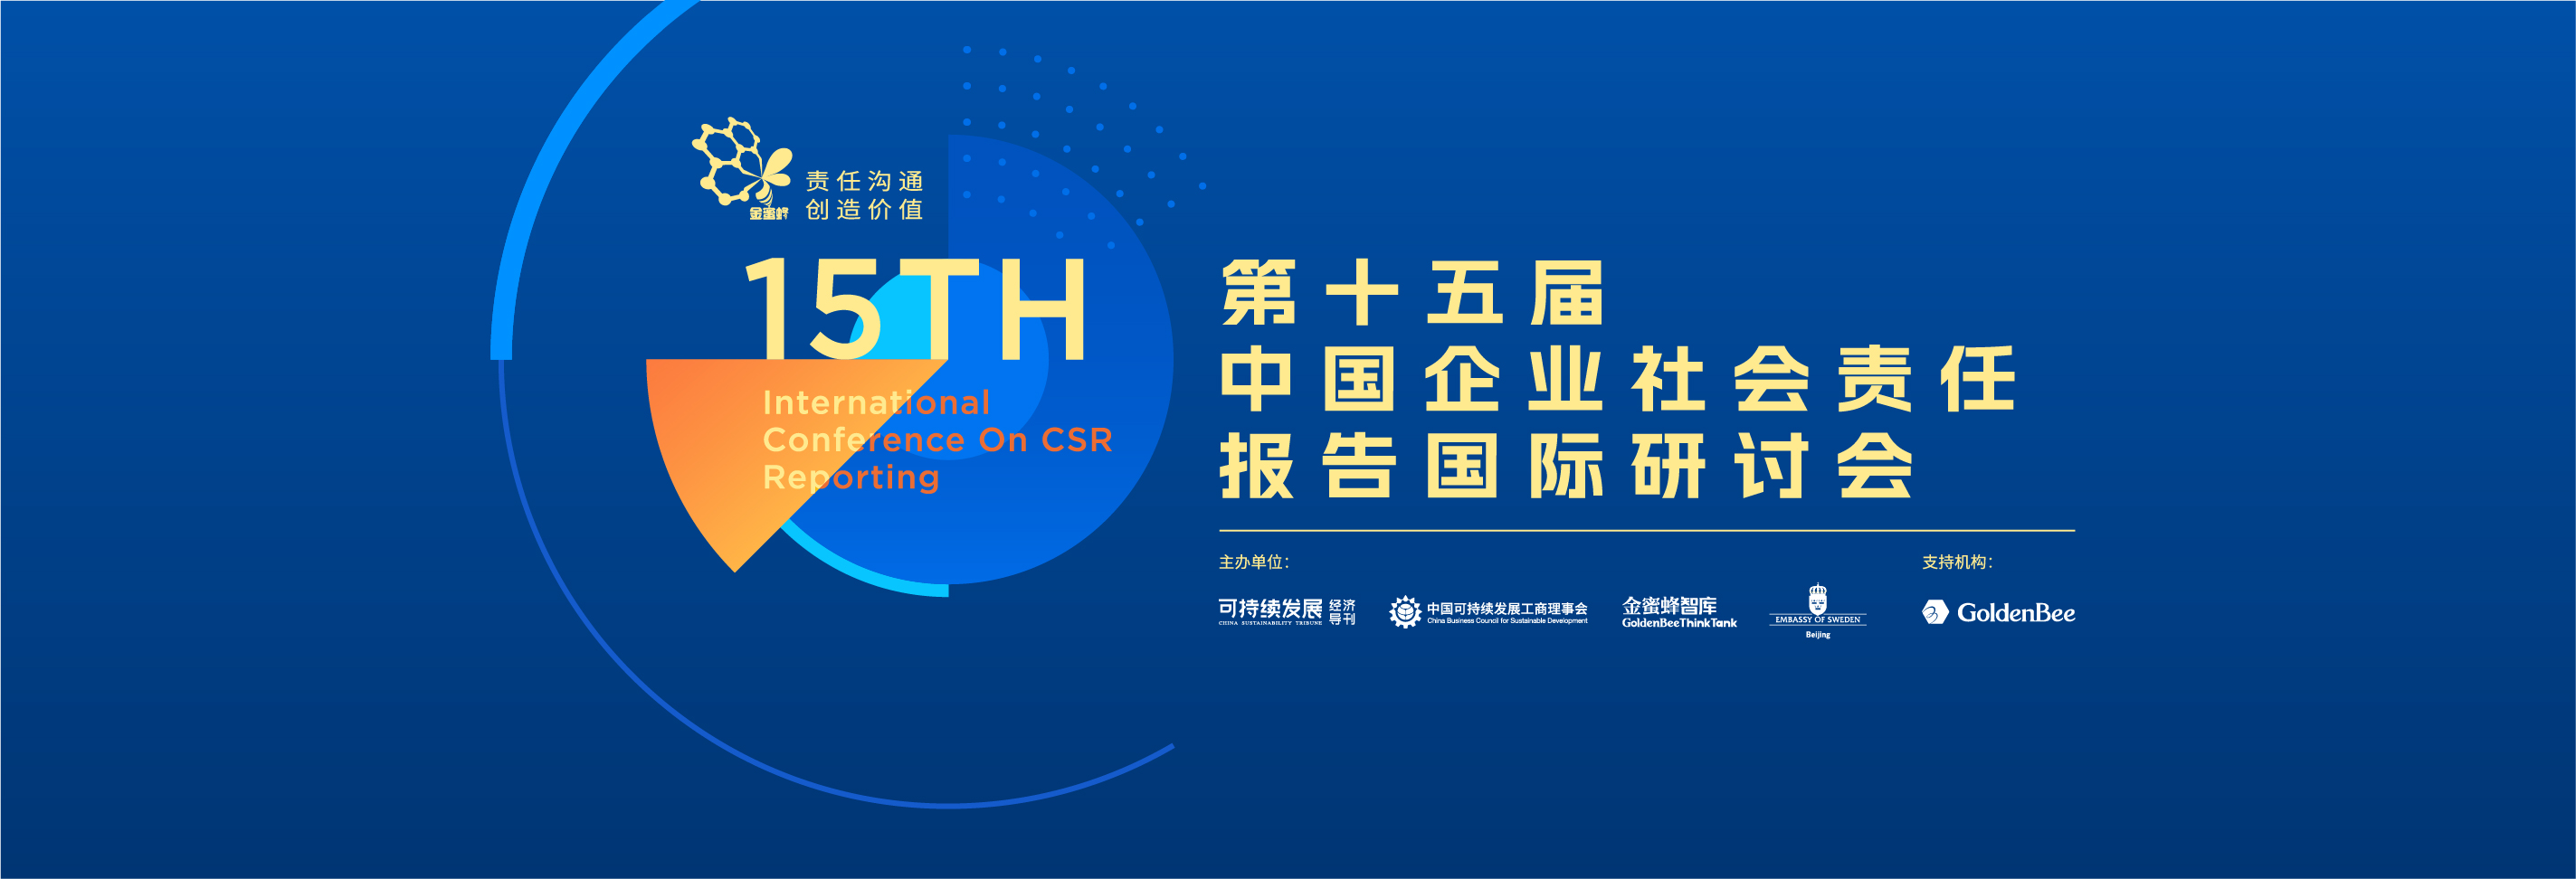 15th International Conference on CSR Reporting in China held